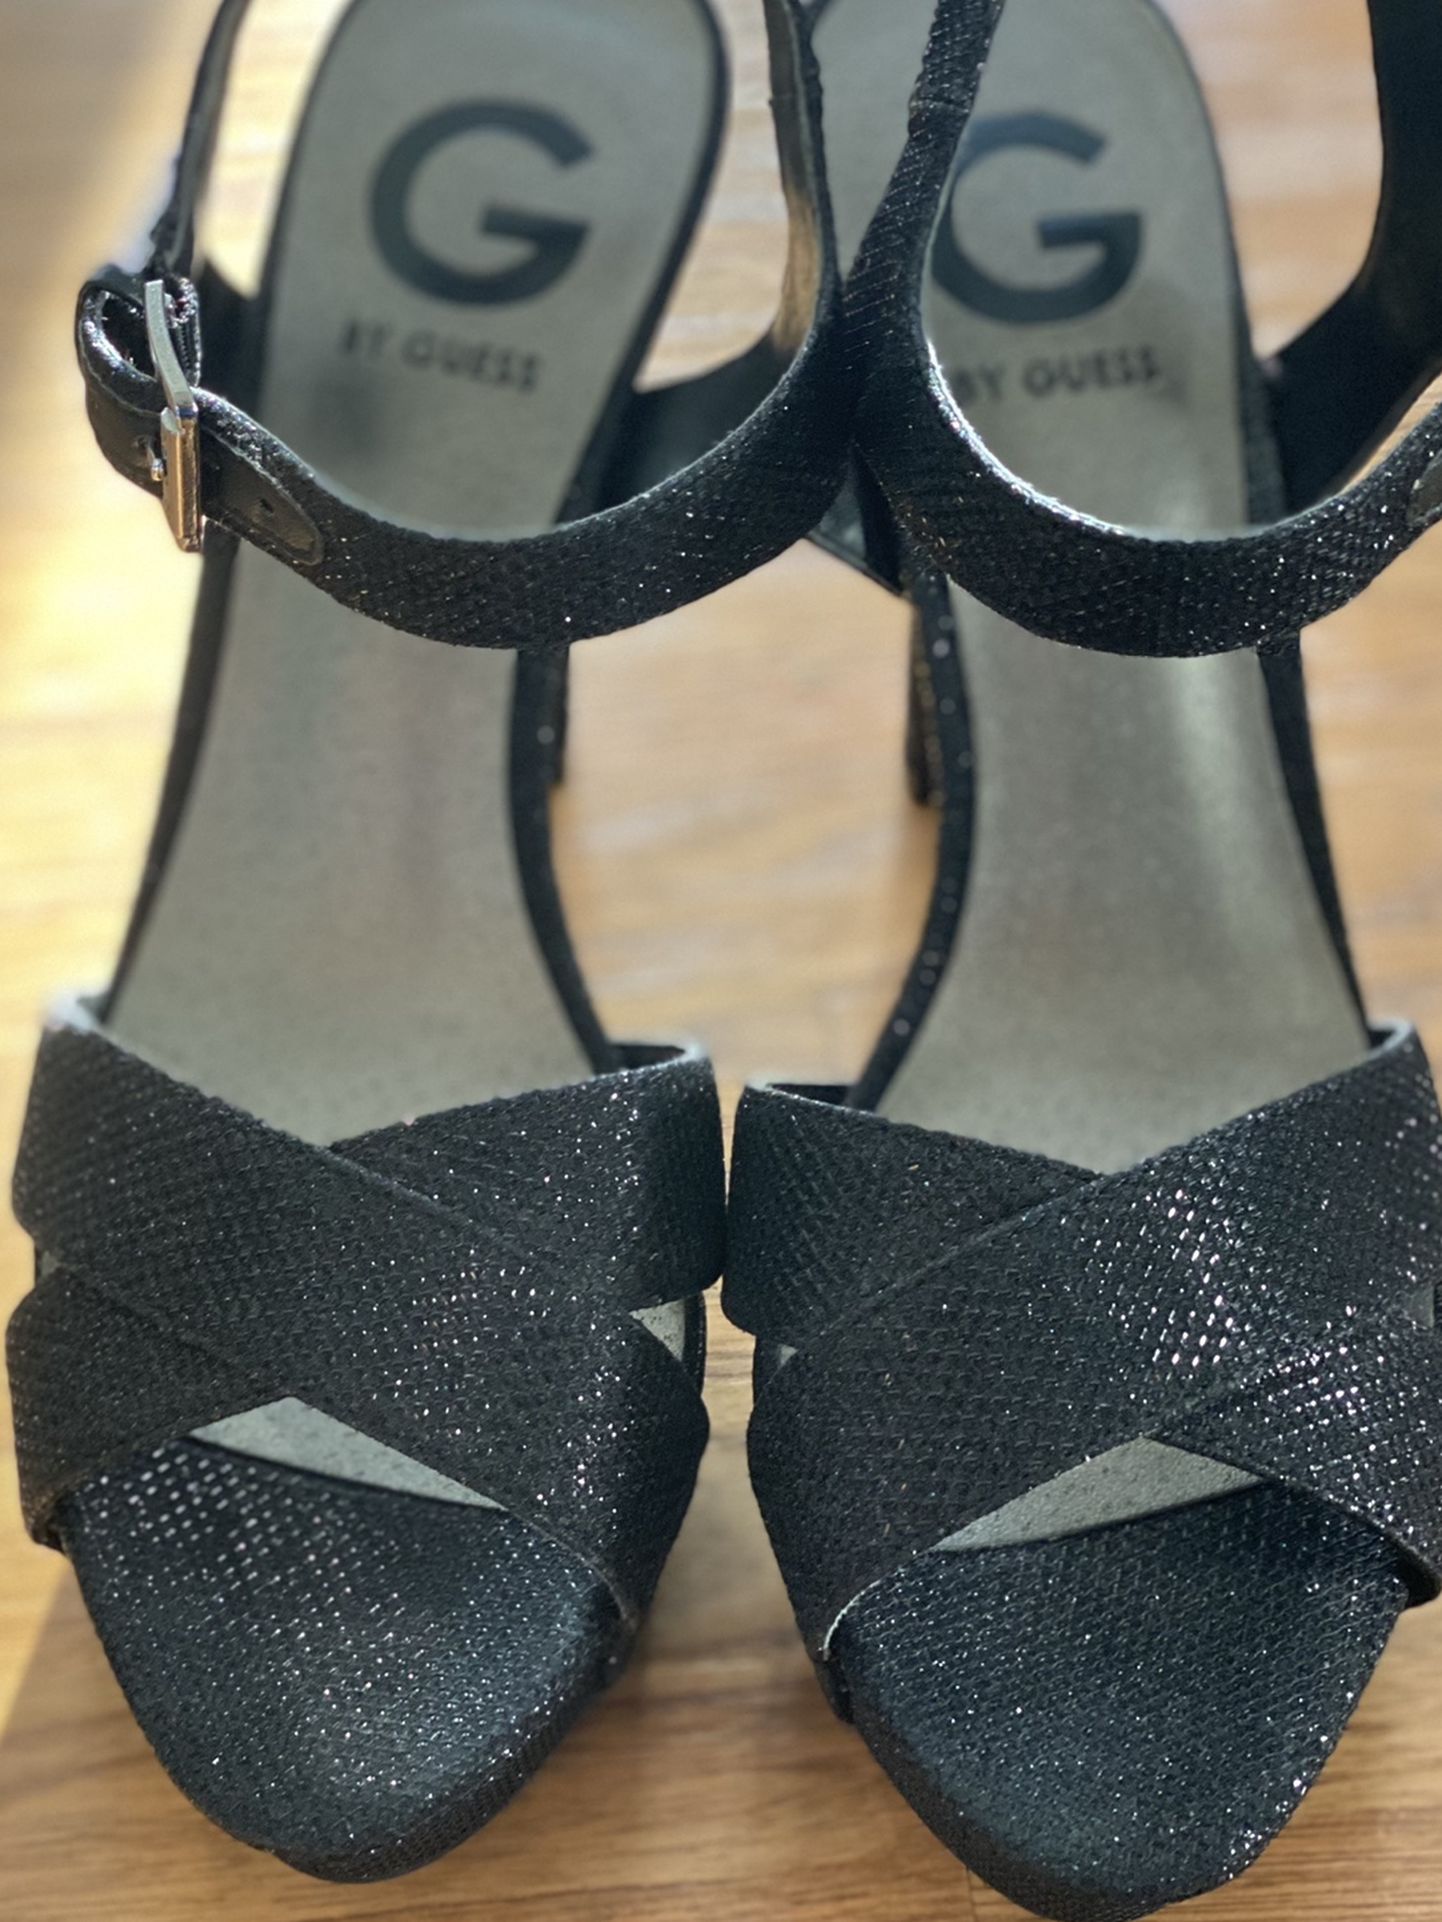 Ladies Black Strappy Heels By Guess Size 6 1/2